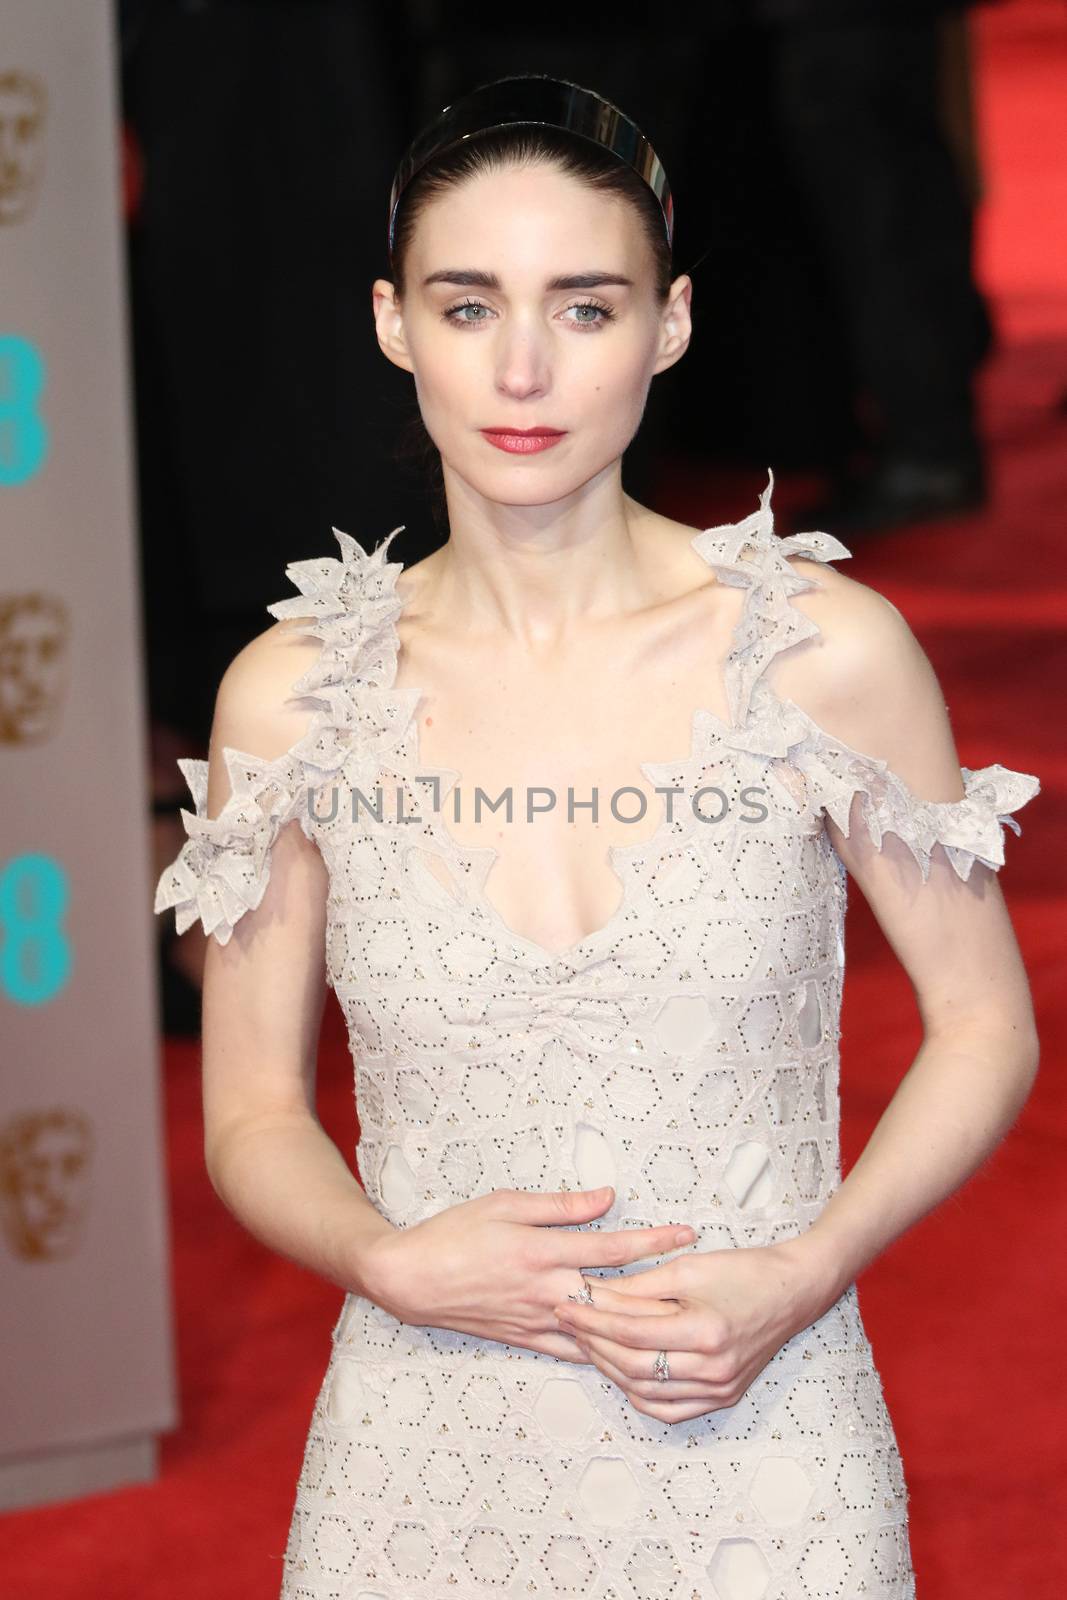 UK, London: American actress Rooney Mara poses on the red Carpet at the EE British Academy Film Awards, BAFTA Awards, at the Royal Opera House in London, England, on 14 February 2016.